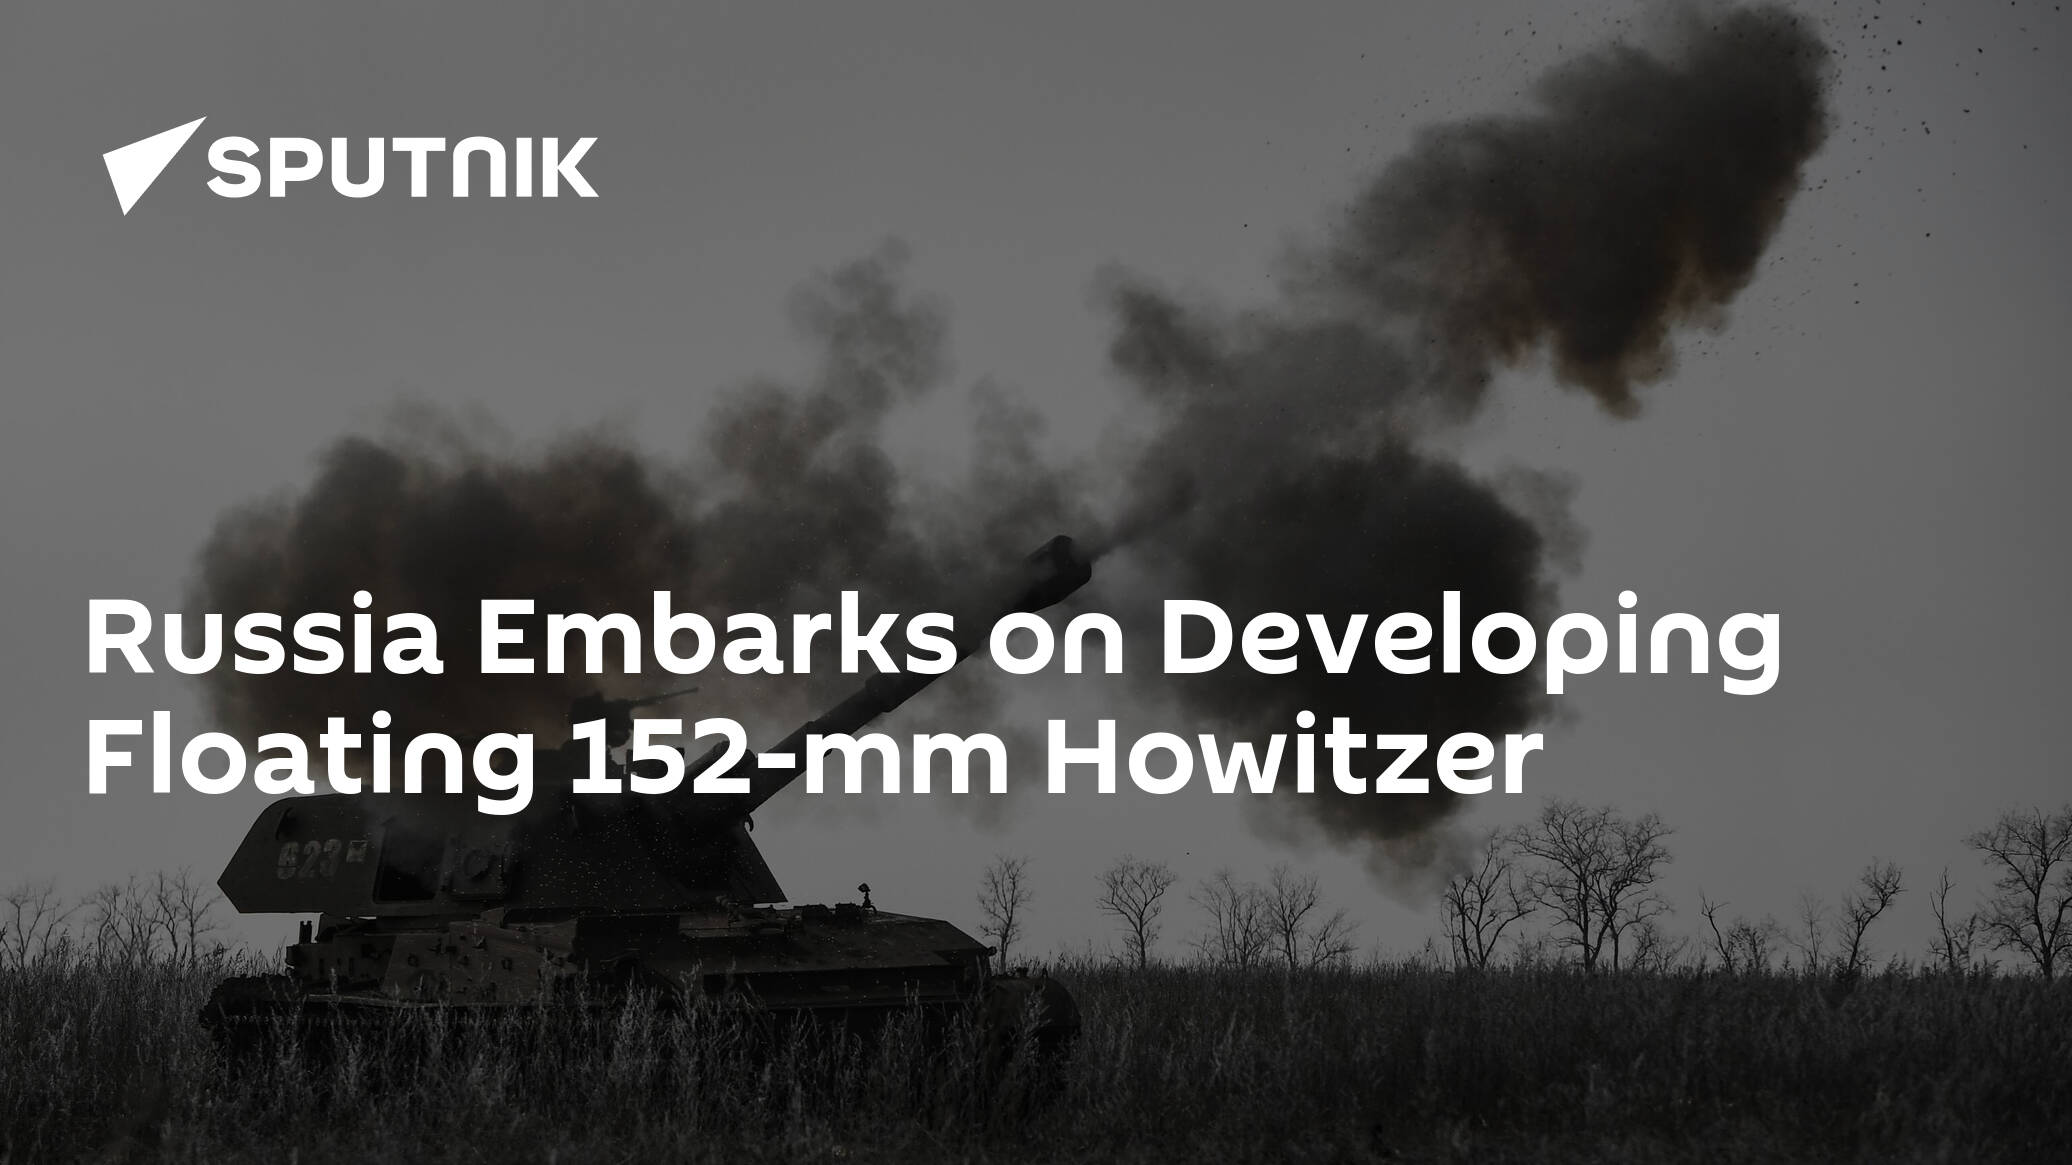 Russia Embarks on Developing Floating 152-mm Howitzer